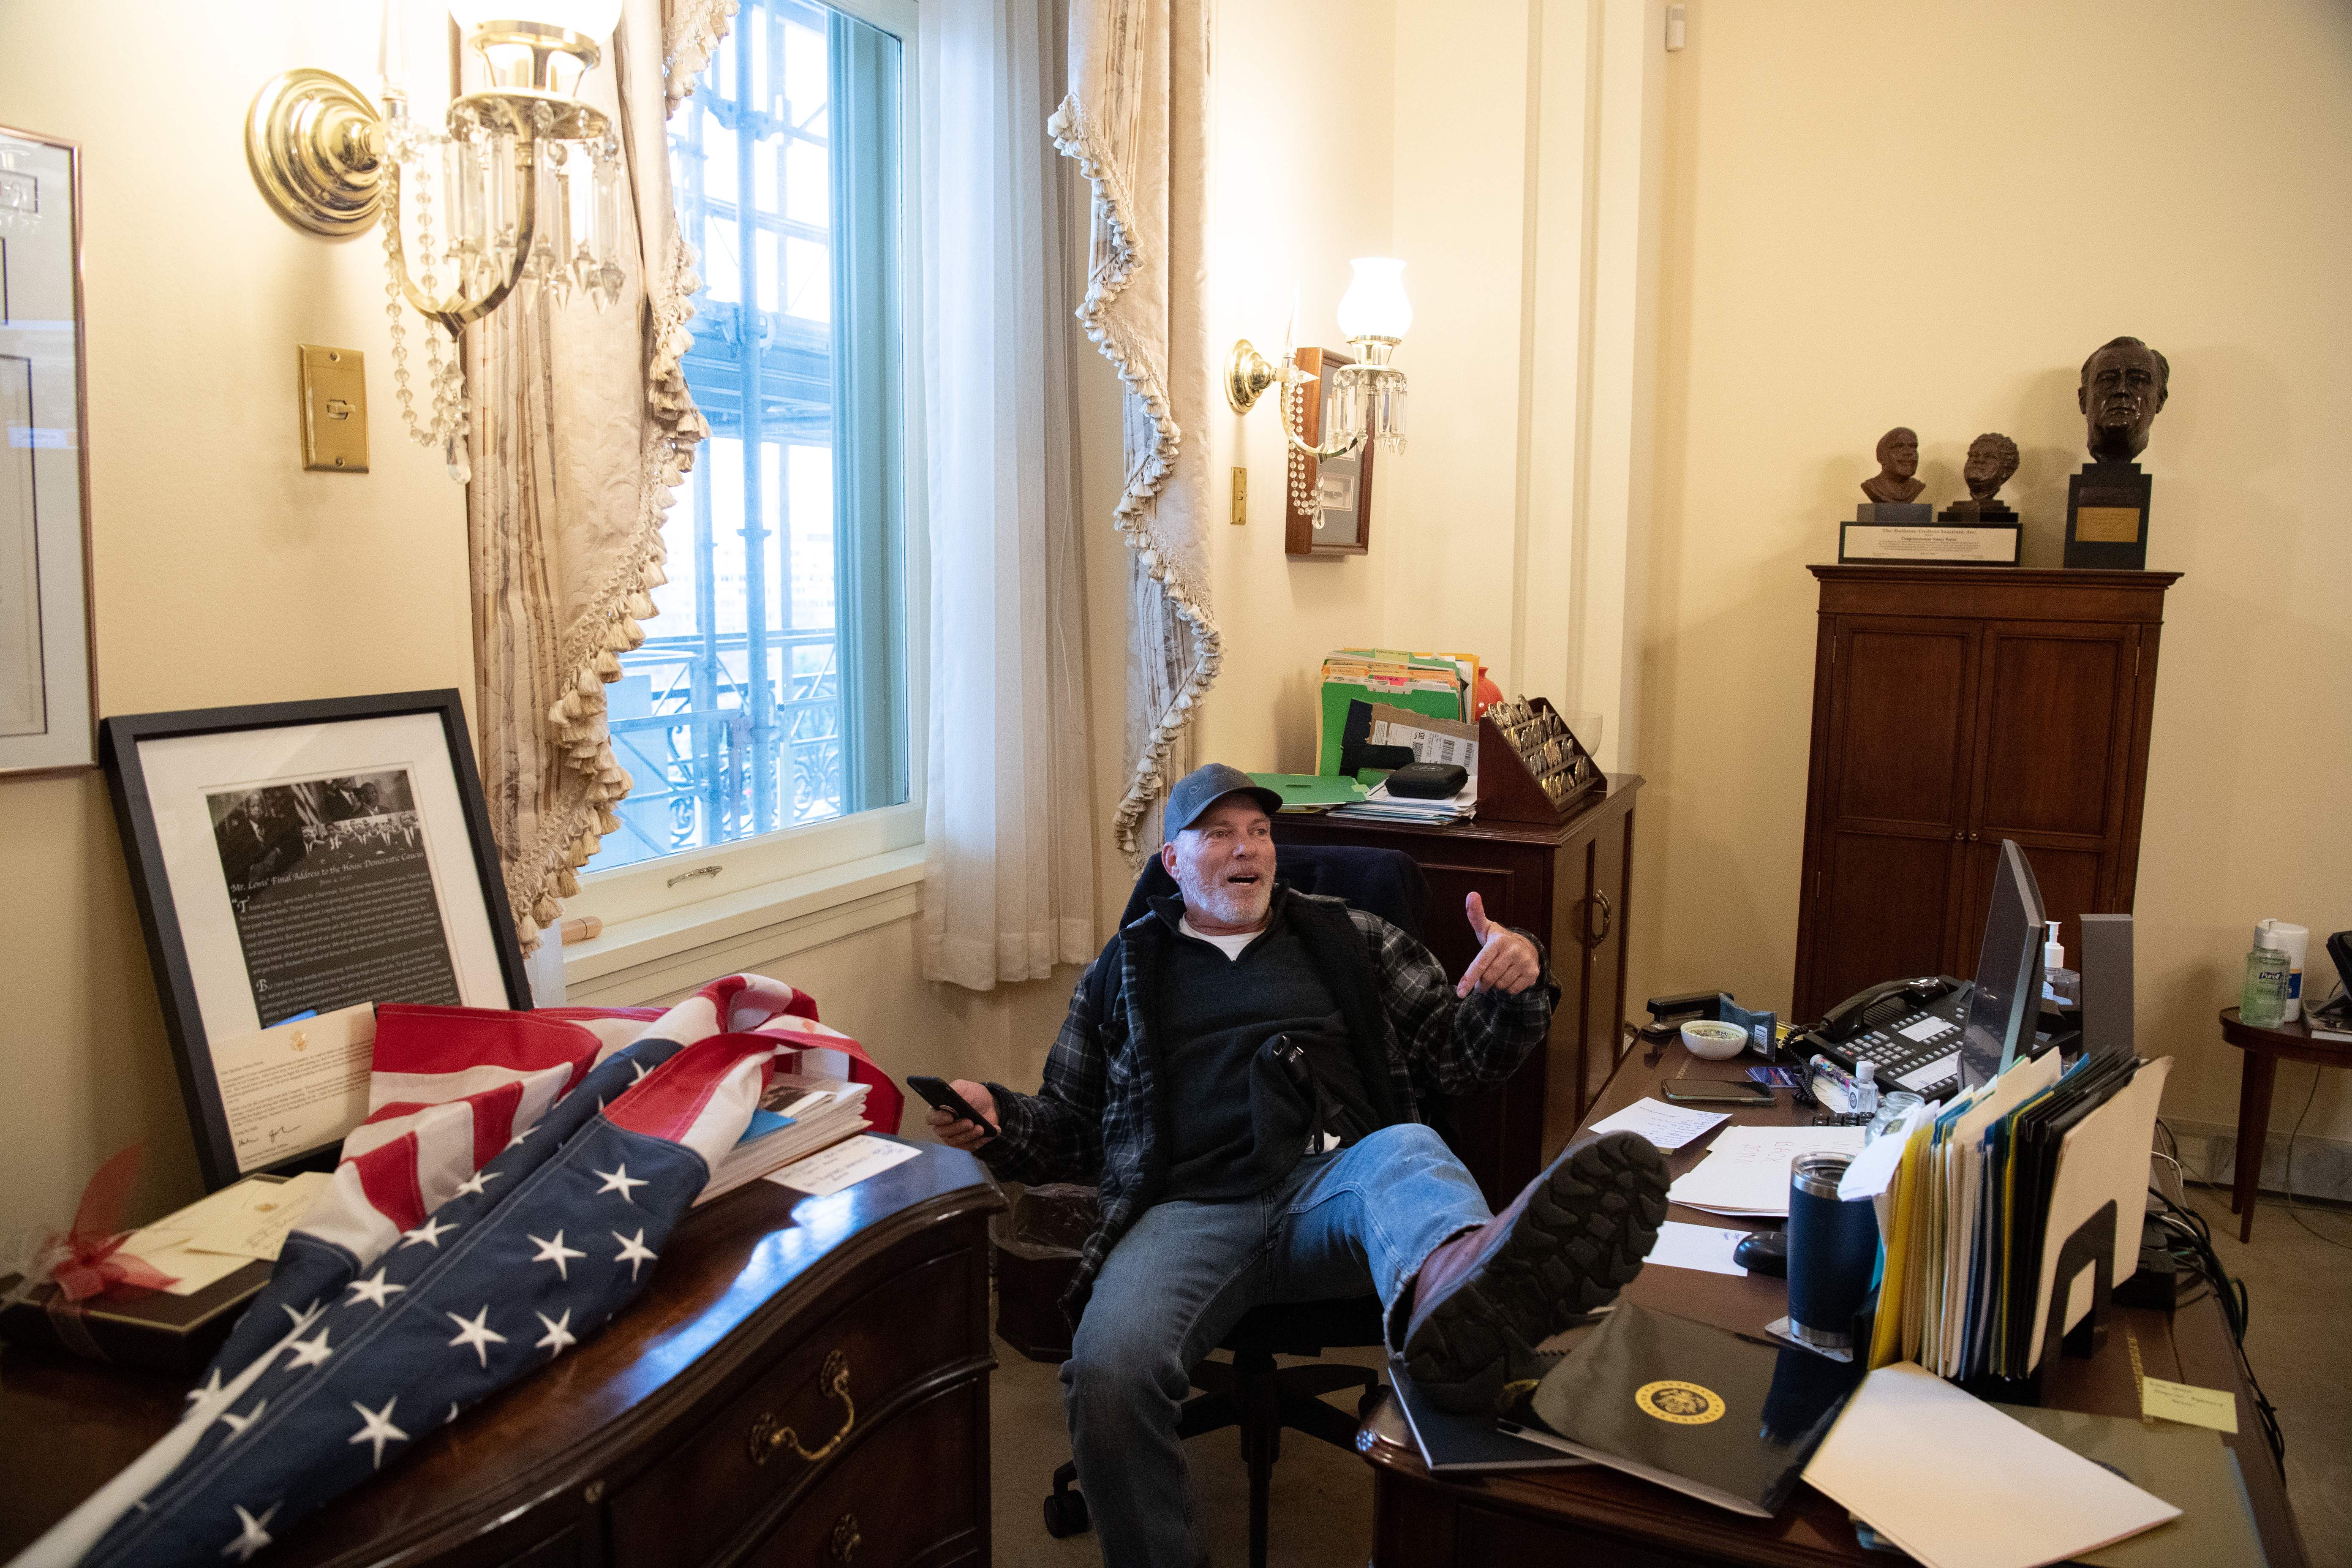 A supporter of US President Donald Trump sits inside the office of Speaker of the House Nancy Pelosi.